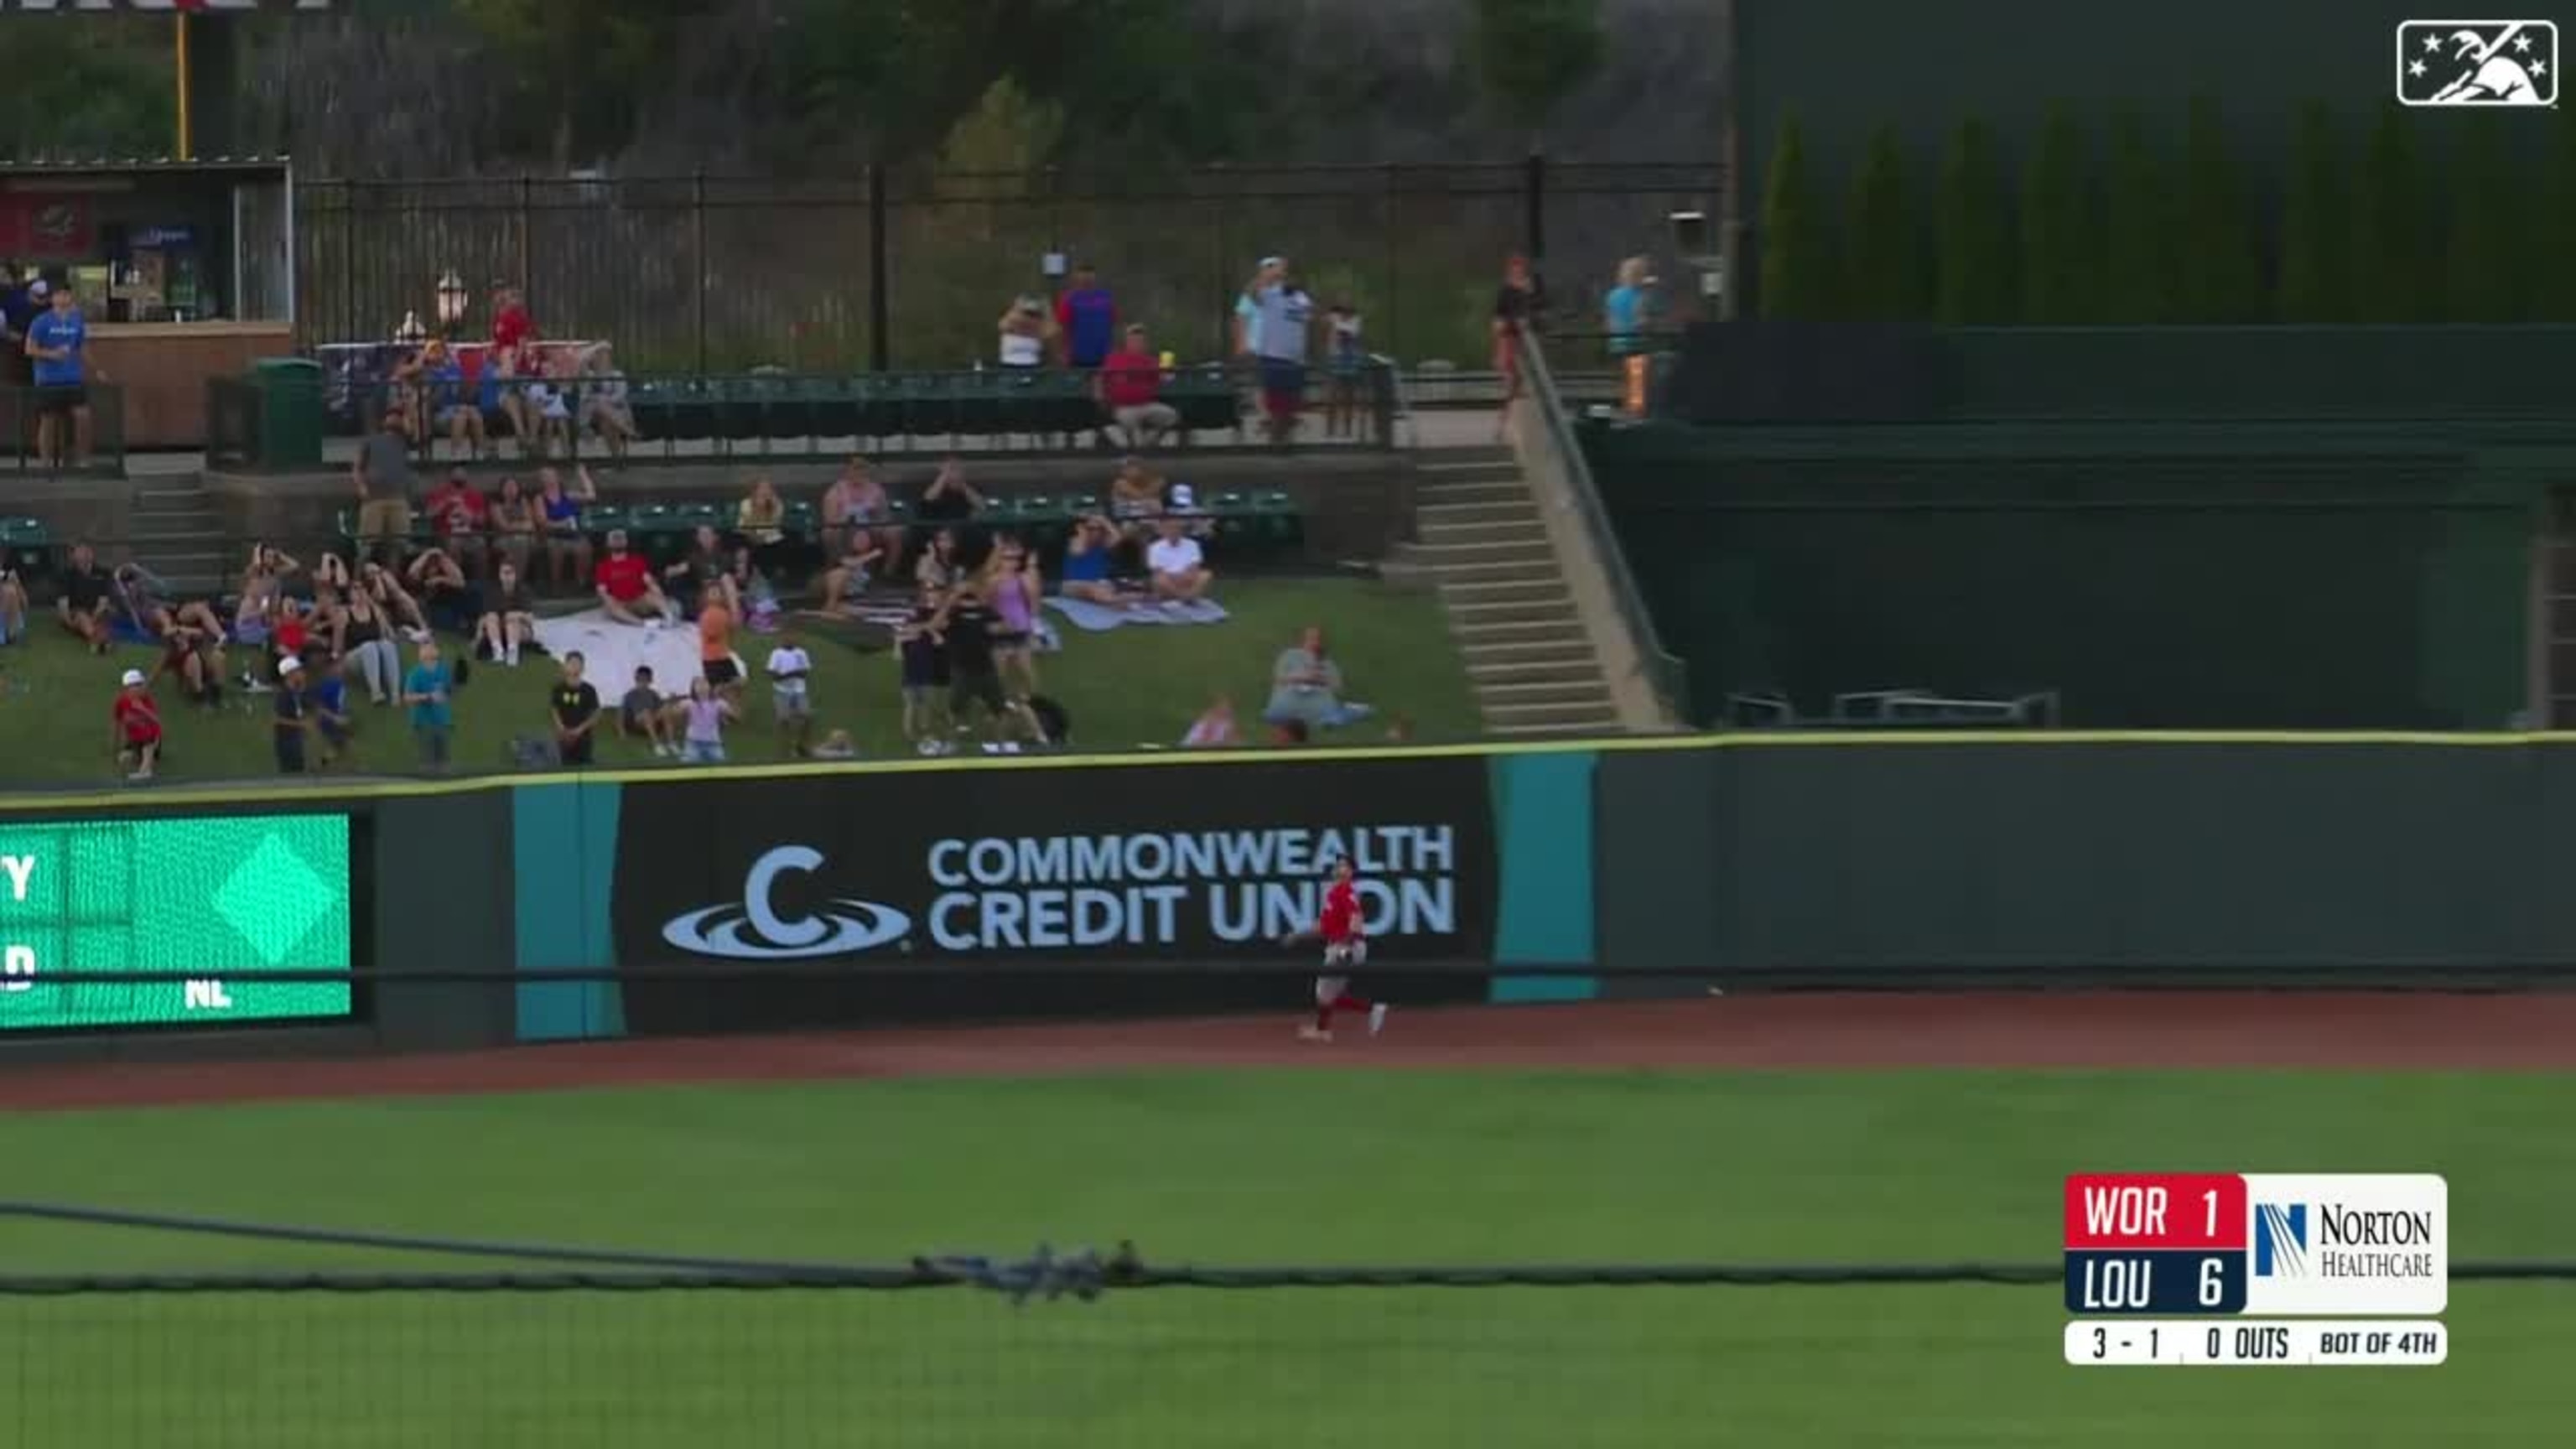 Baseball fans marvel at player's remarkable speed display